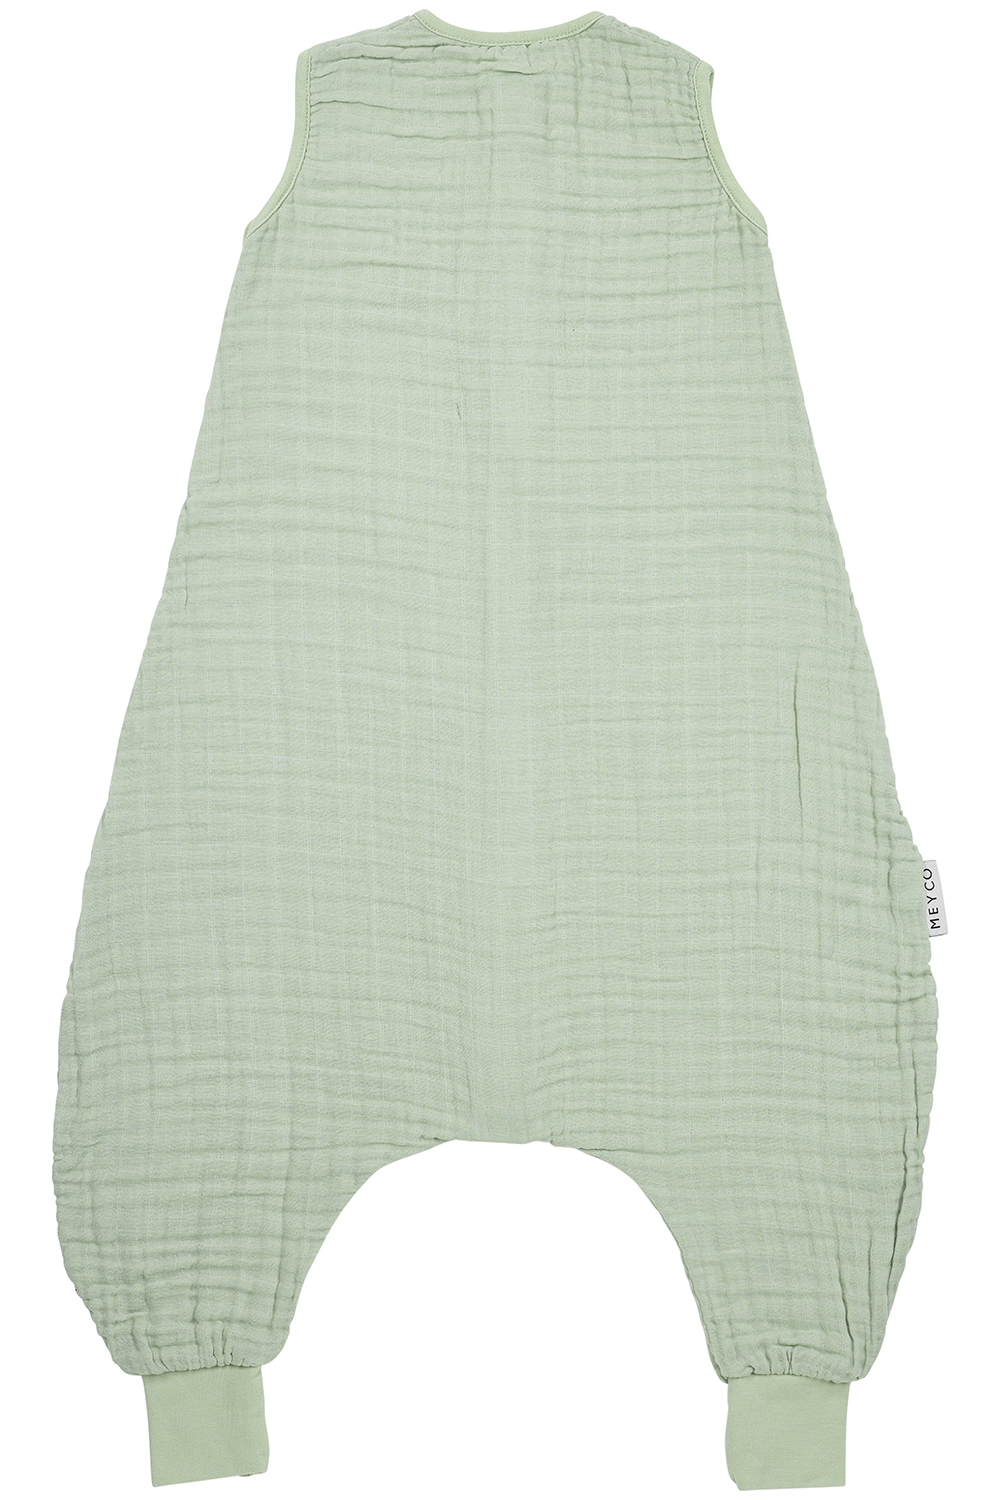 Baby sommer Schlafoverall Jumper pre-washed musselin Uni - soft green - 80cm